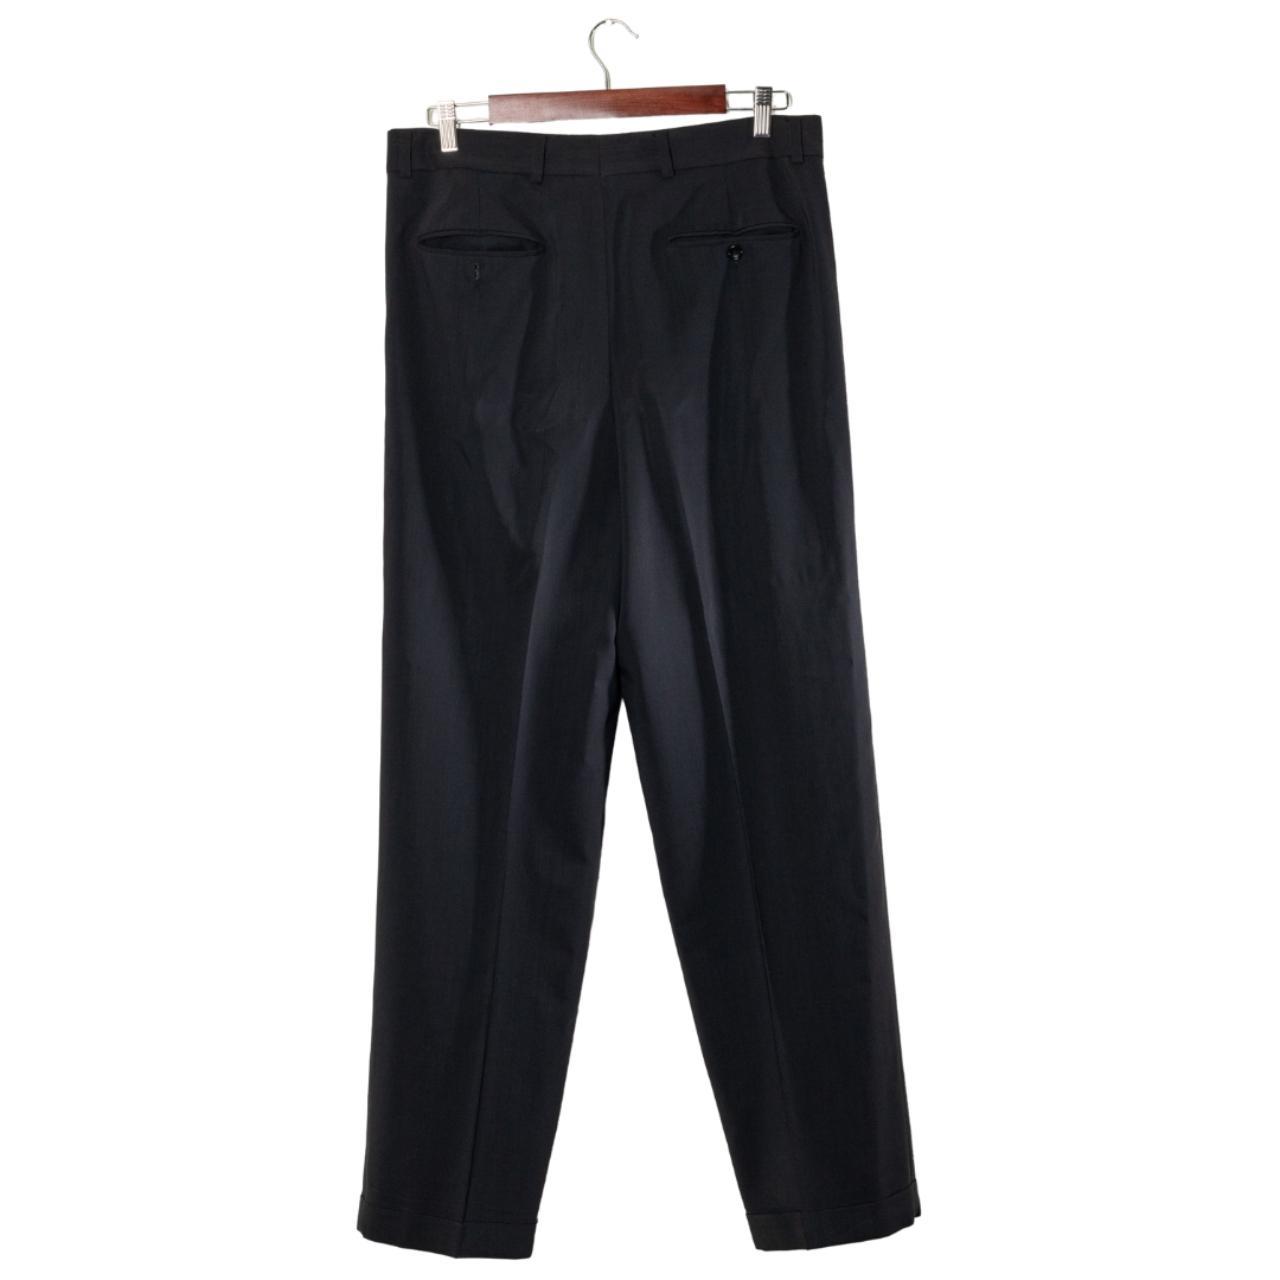 Armani Men's Black and Navy Trousers (2)